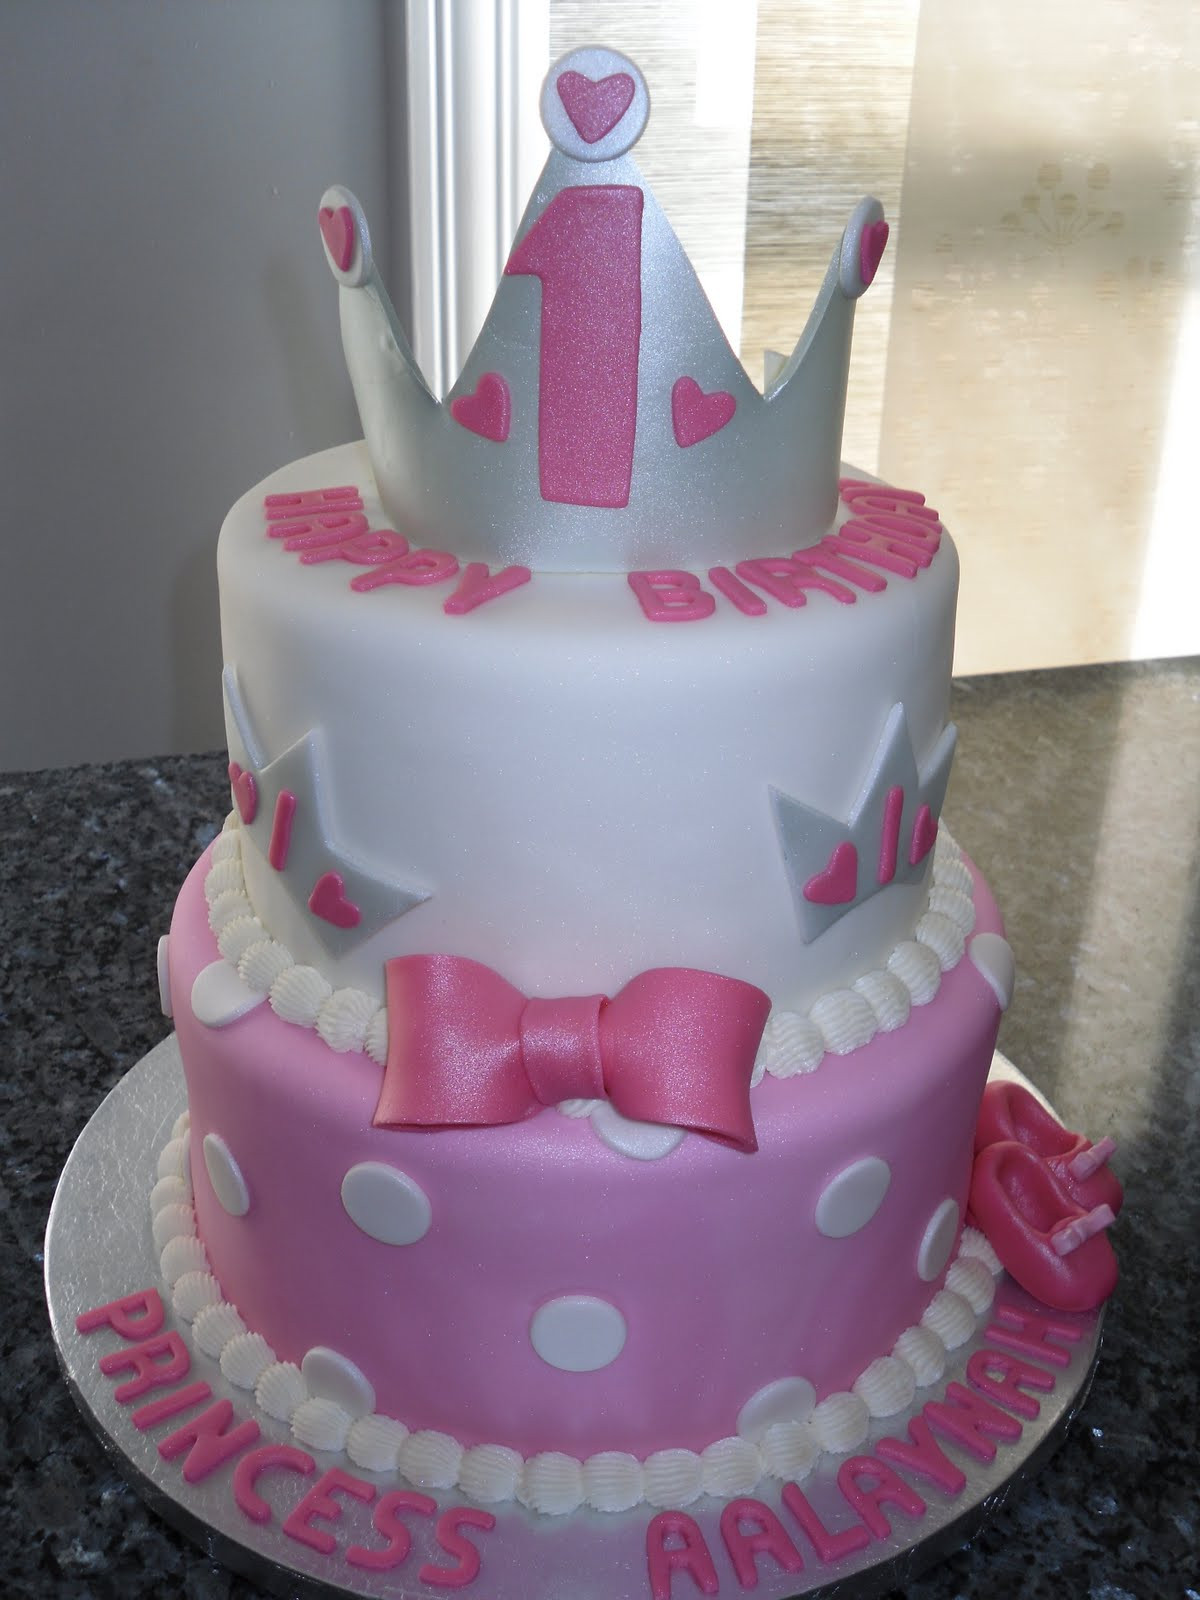 2 Year Old Birthday Cake
 Carat Cakes Two Very Special e Year Old Birthdays